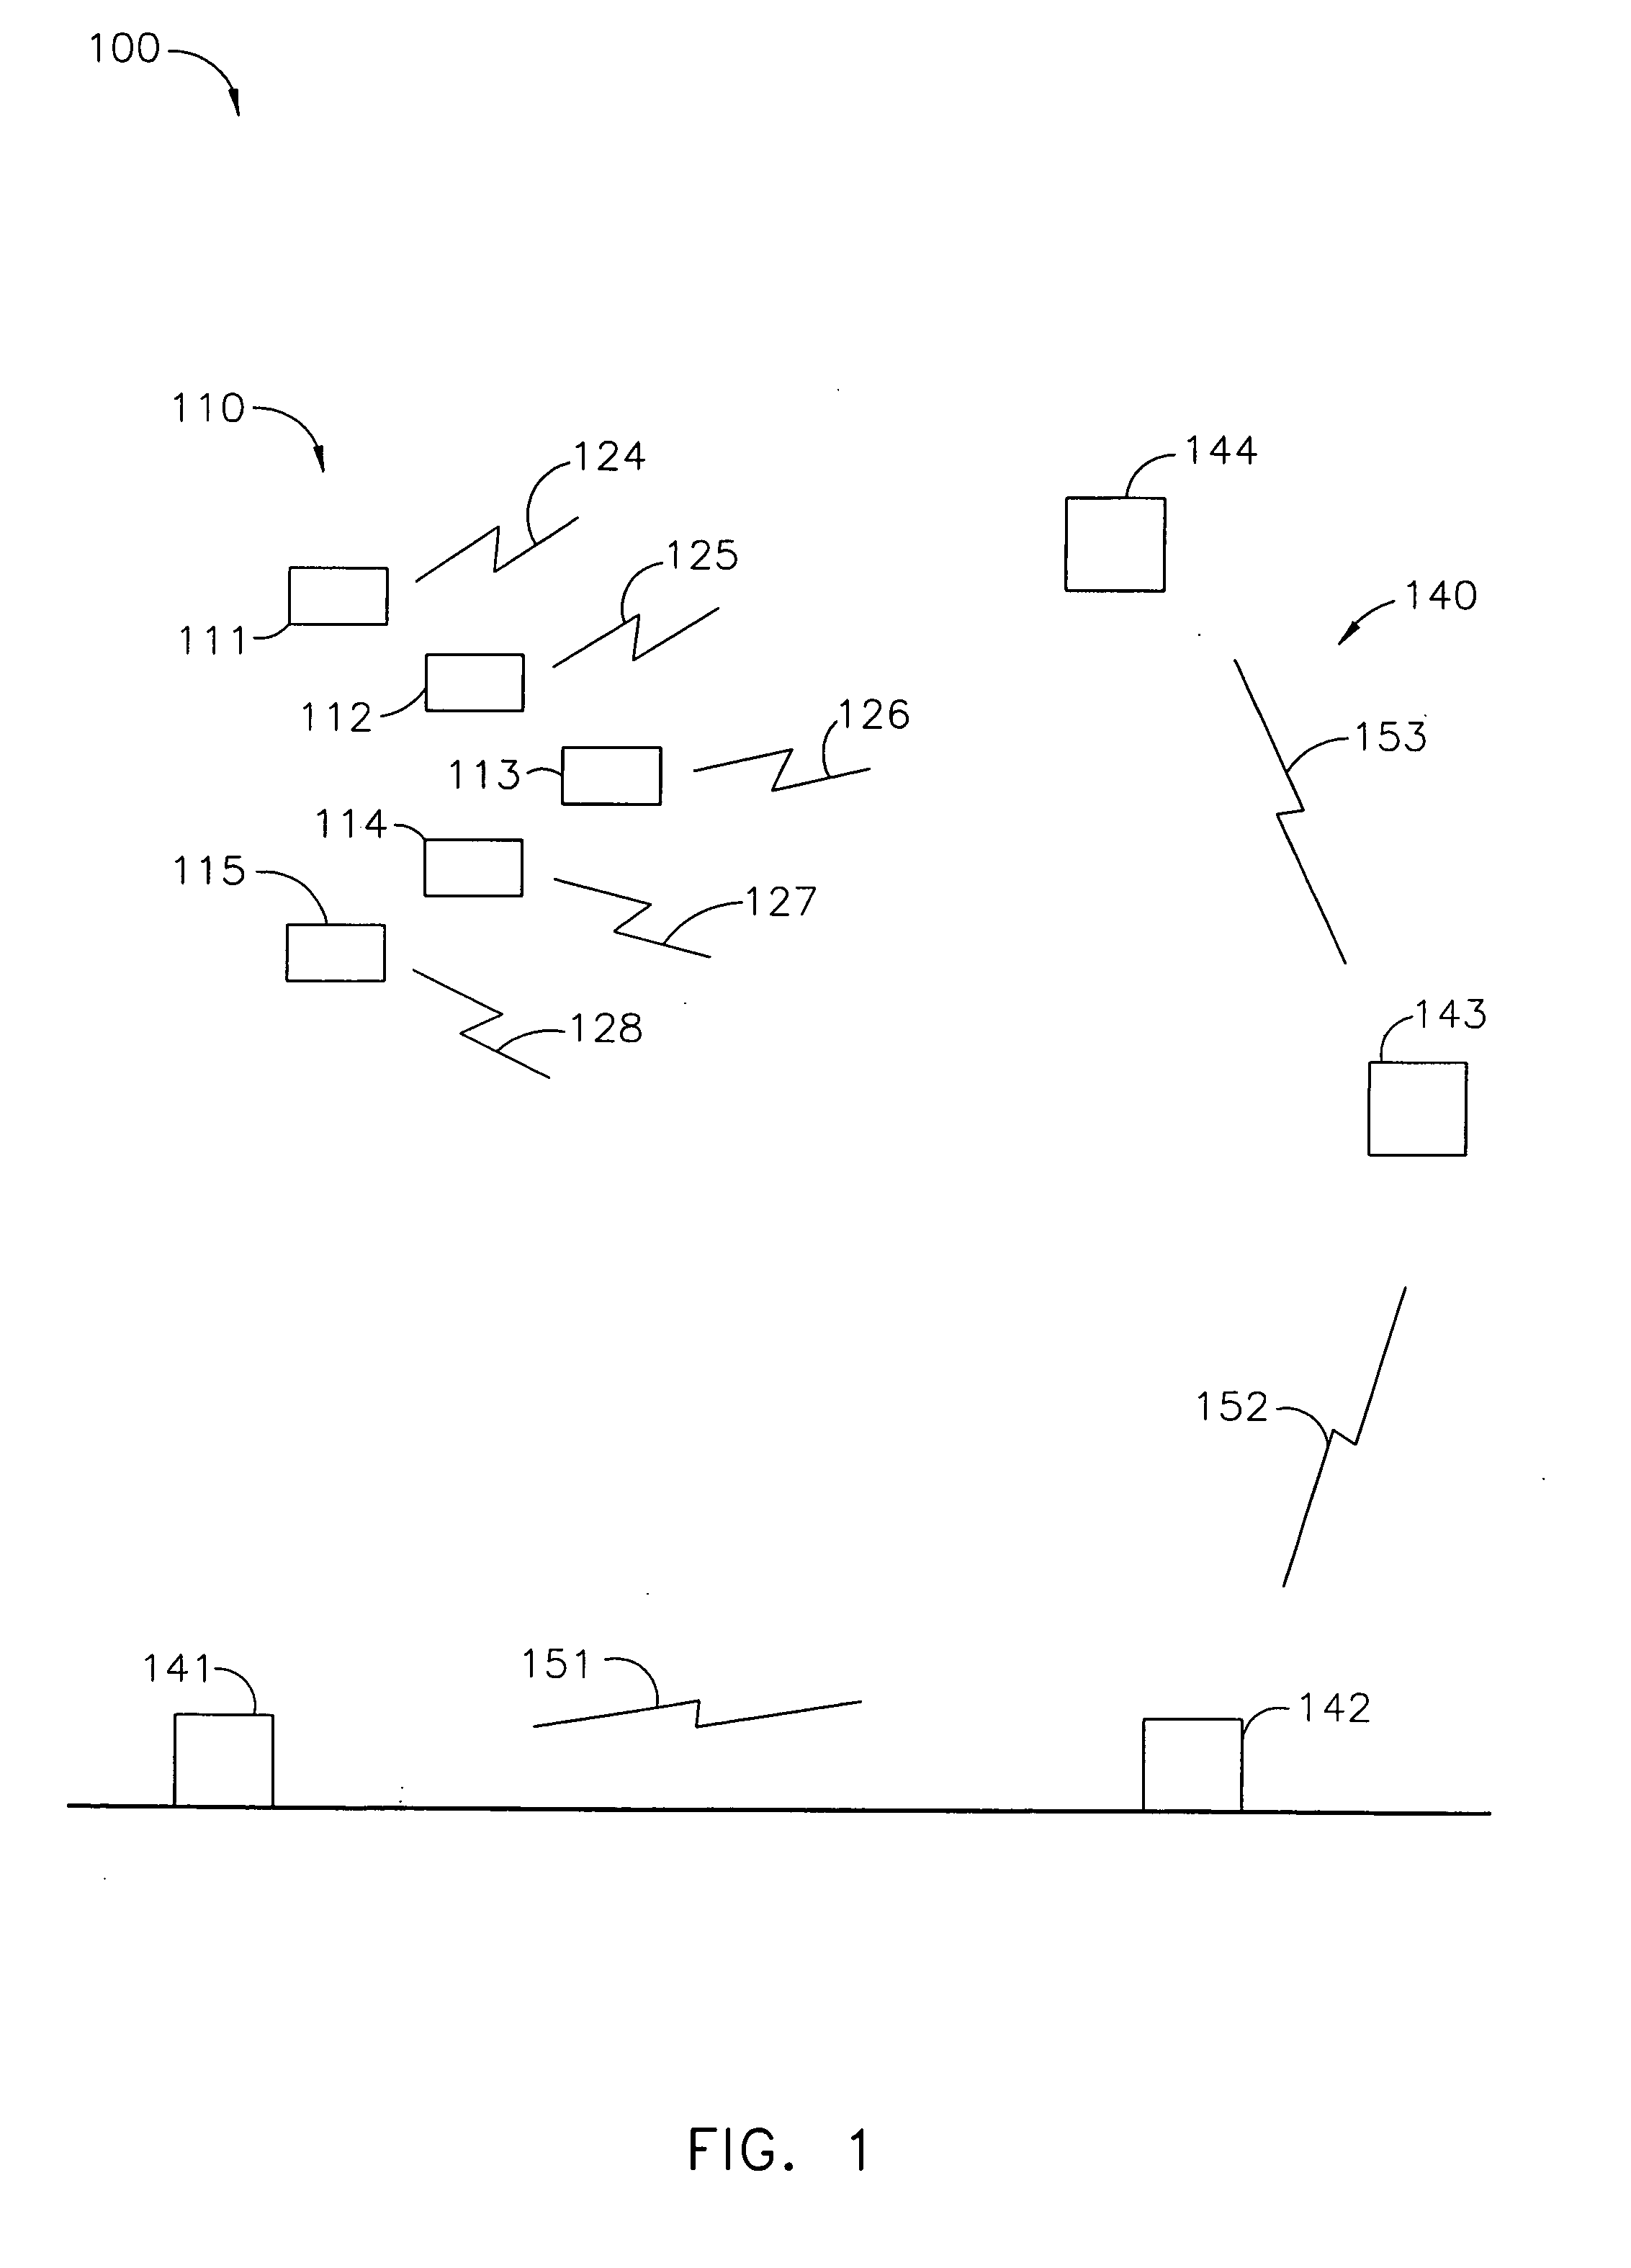 Systems and methods for managing transmission power into a shared medium